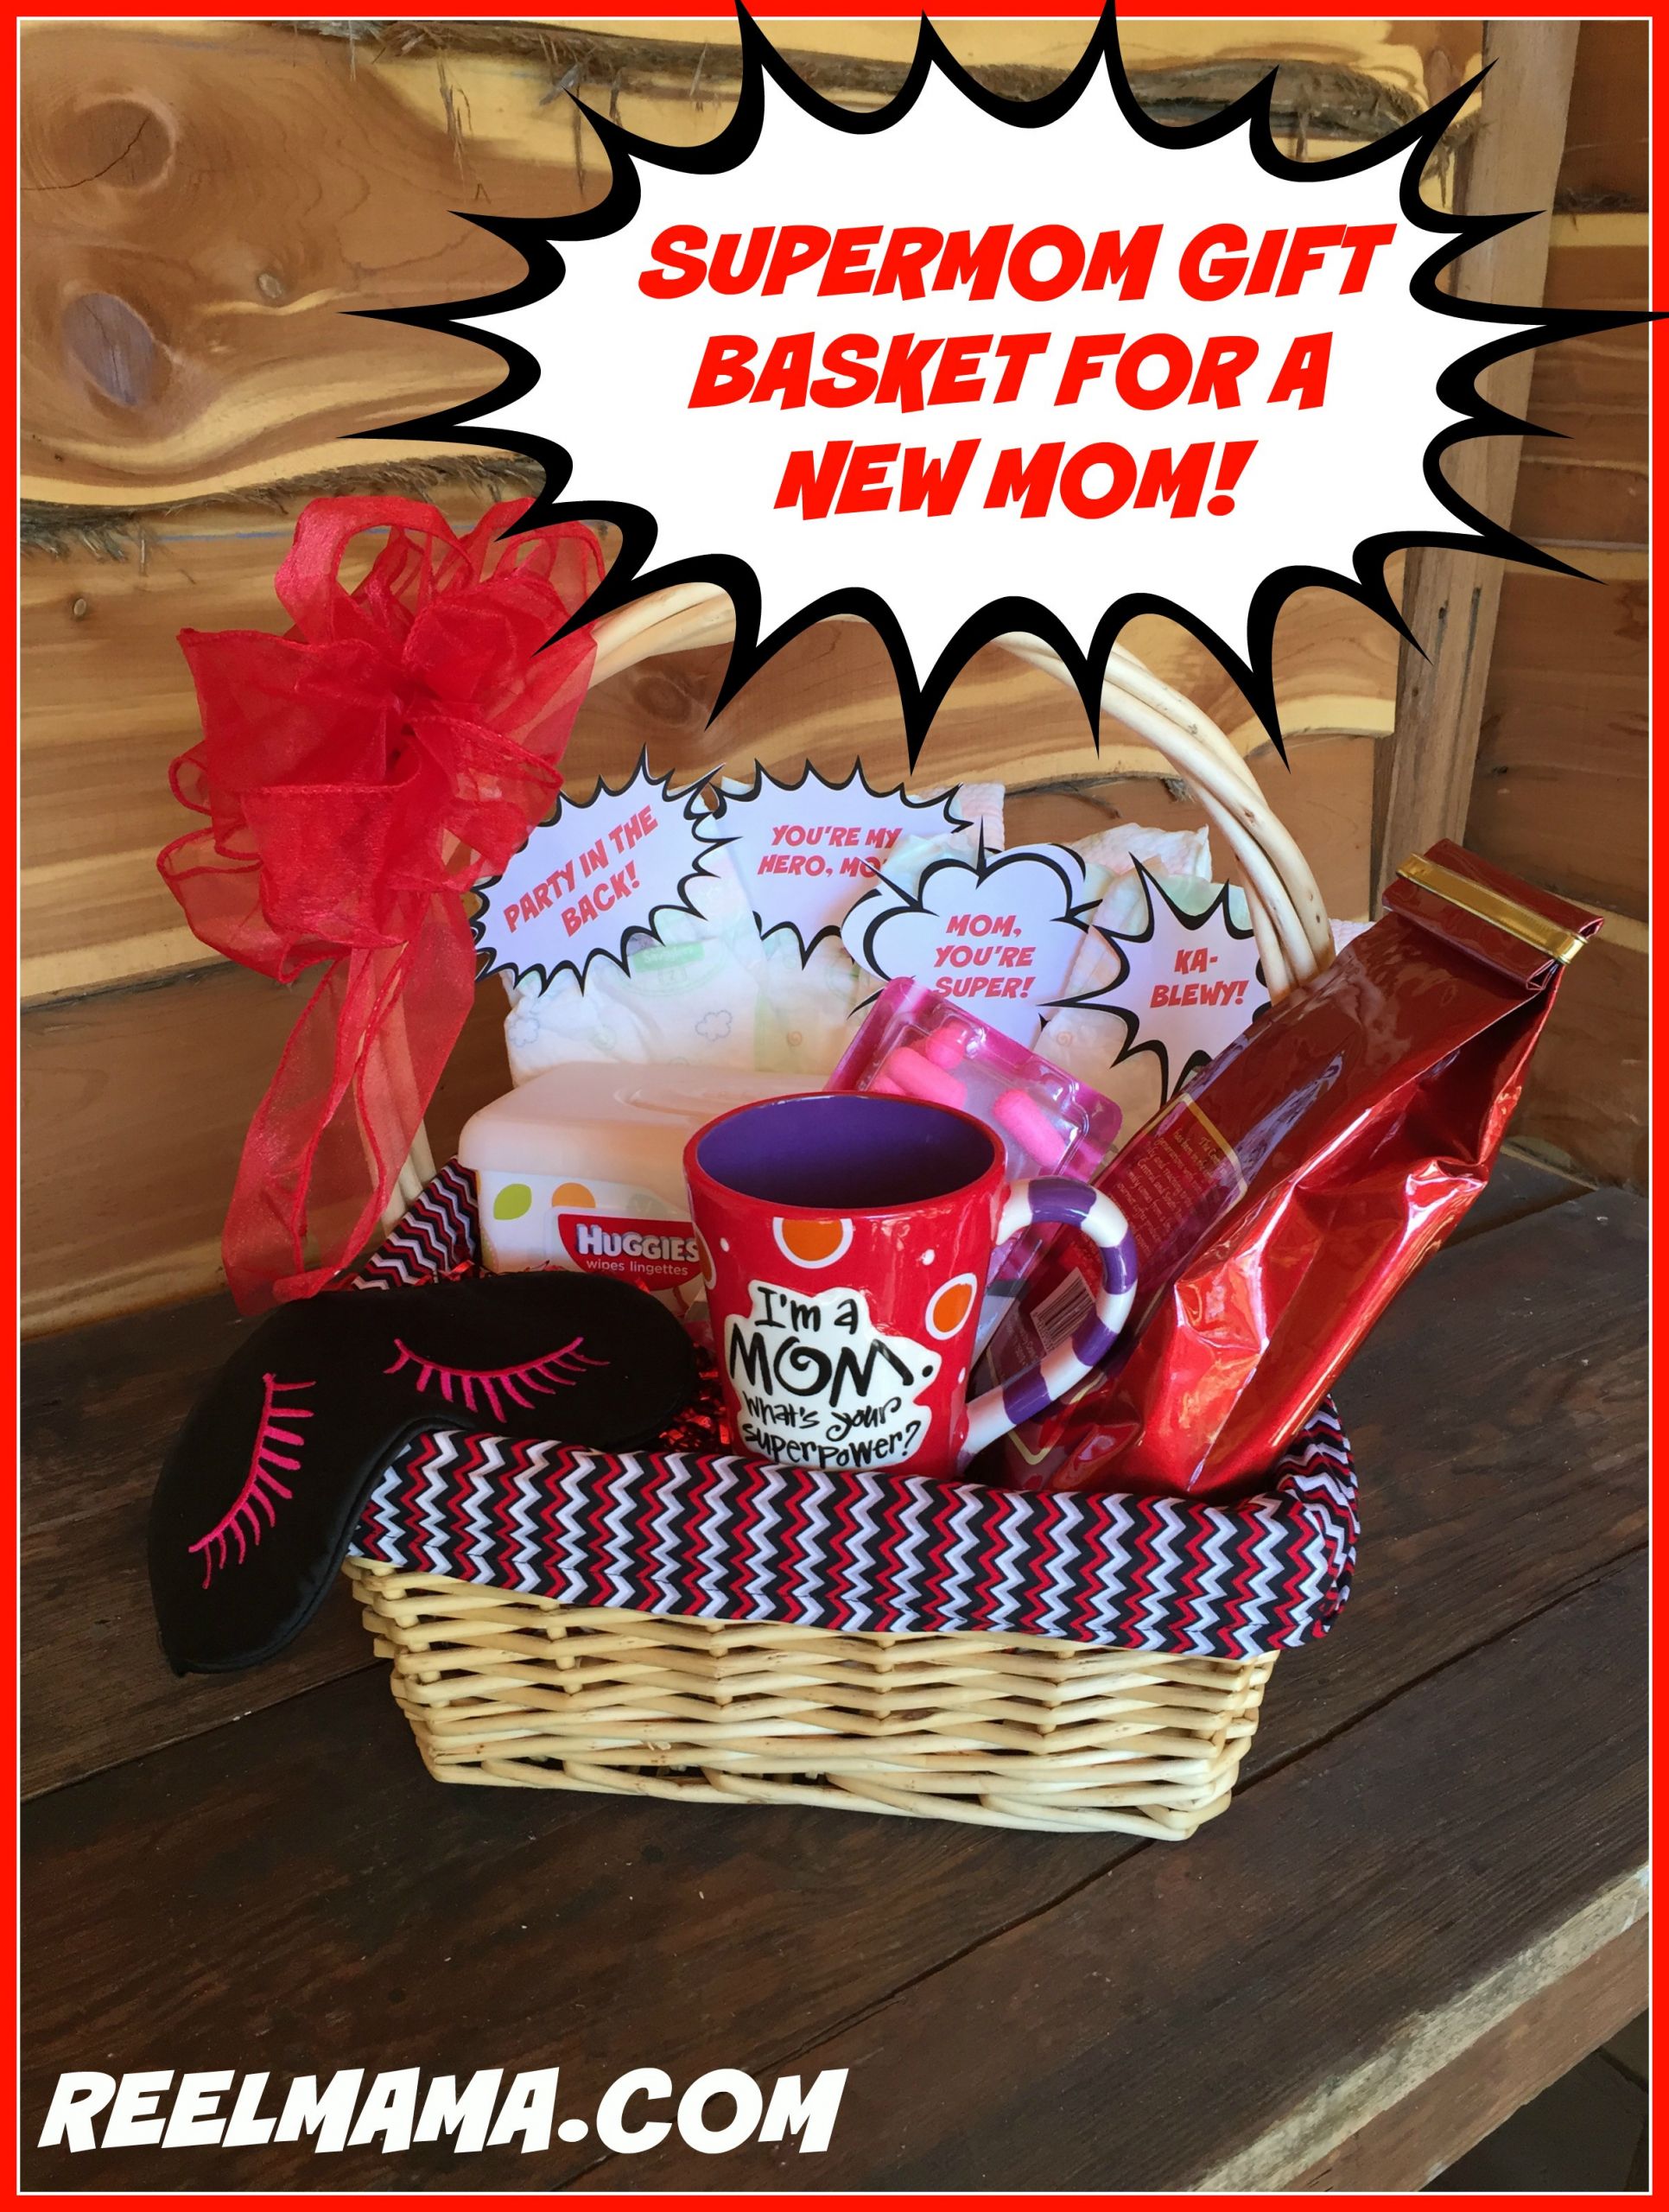 Gift Ideas For New Mothers
 Supermom t basket for a new mom Reelmama